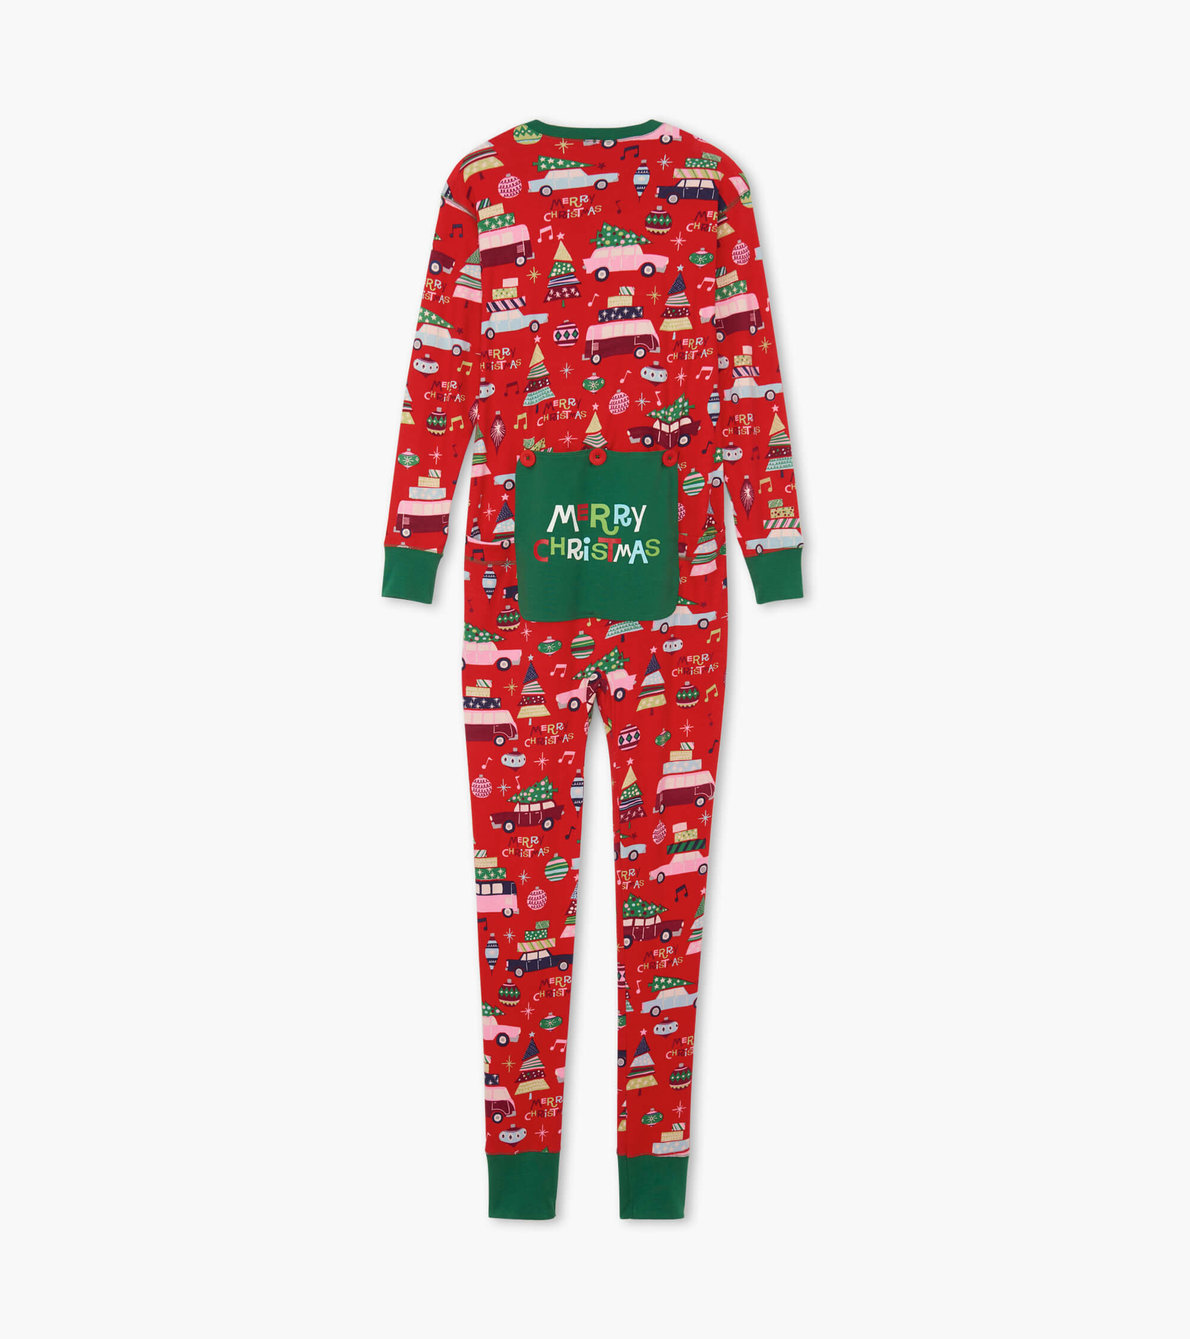 View larger image of Retro Festive Red Adult Union Suit